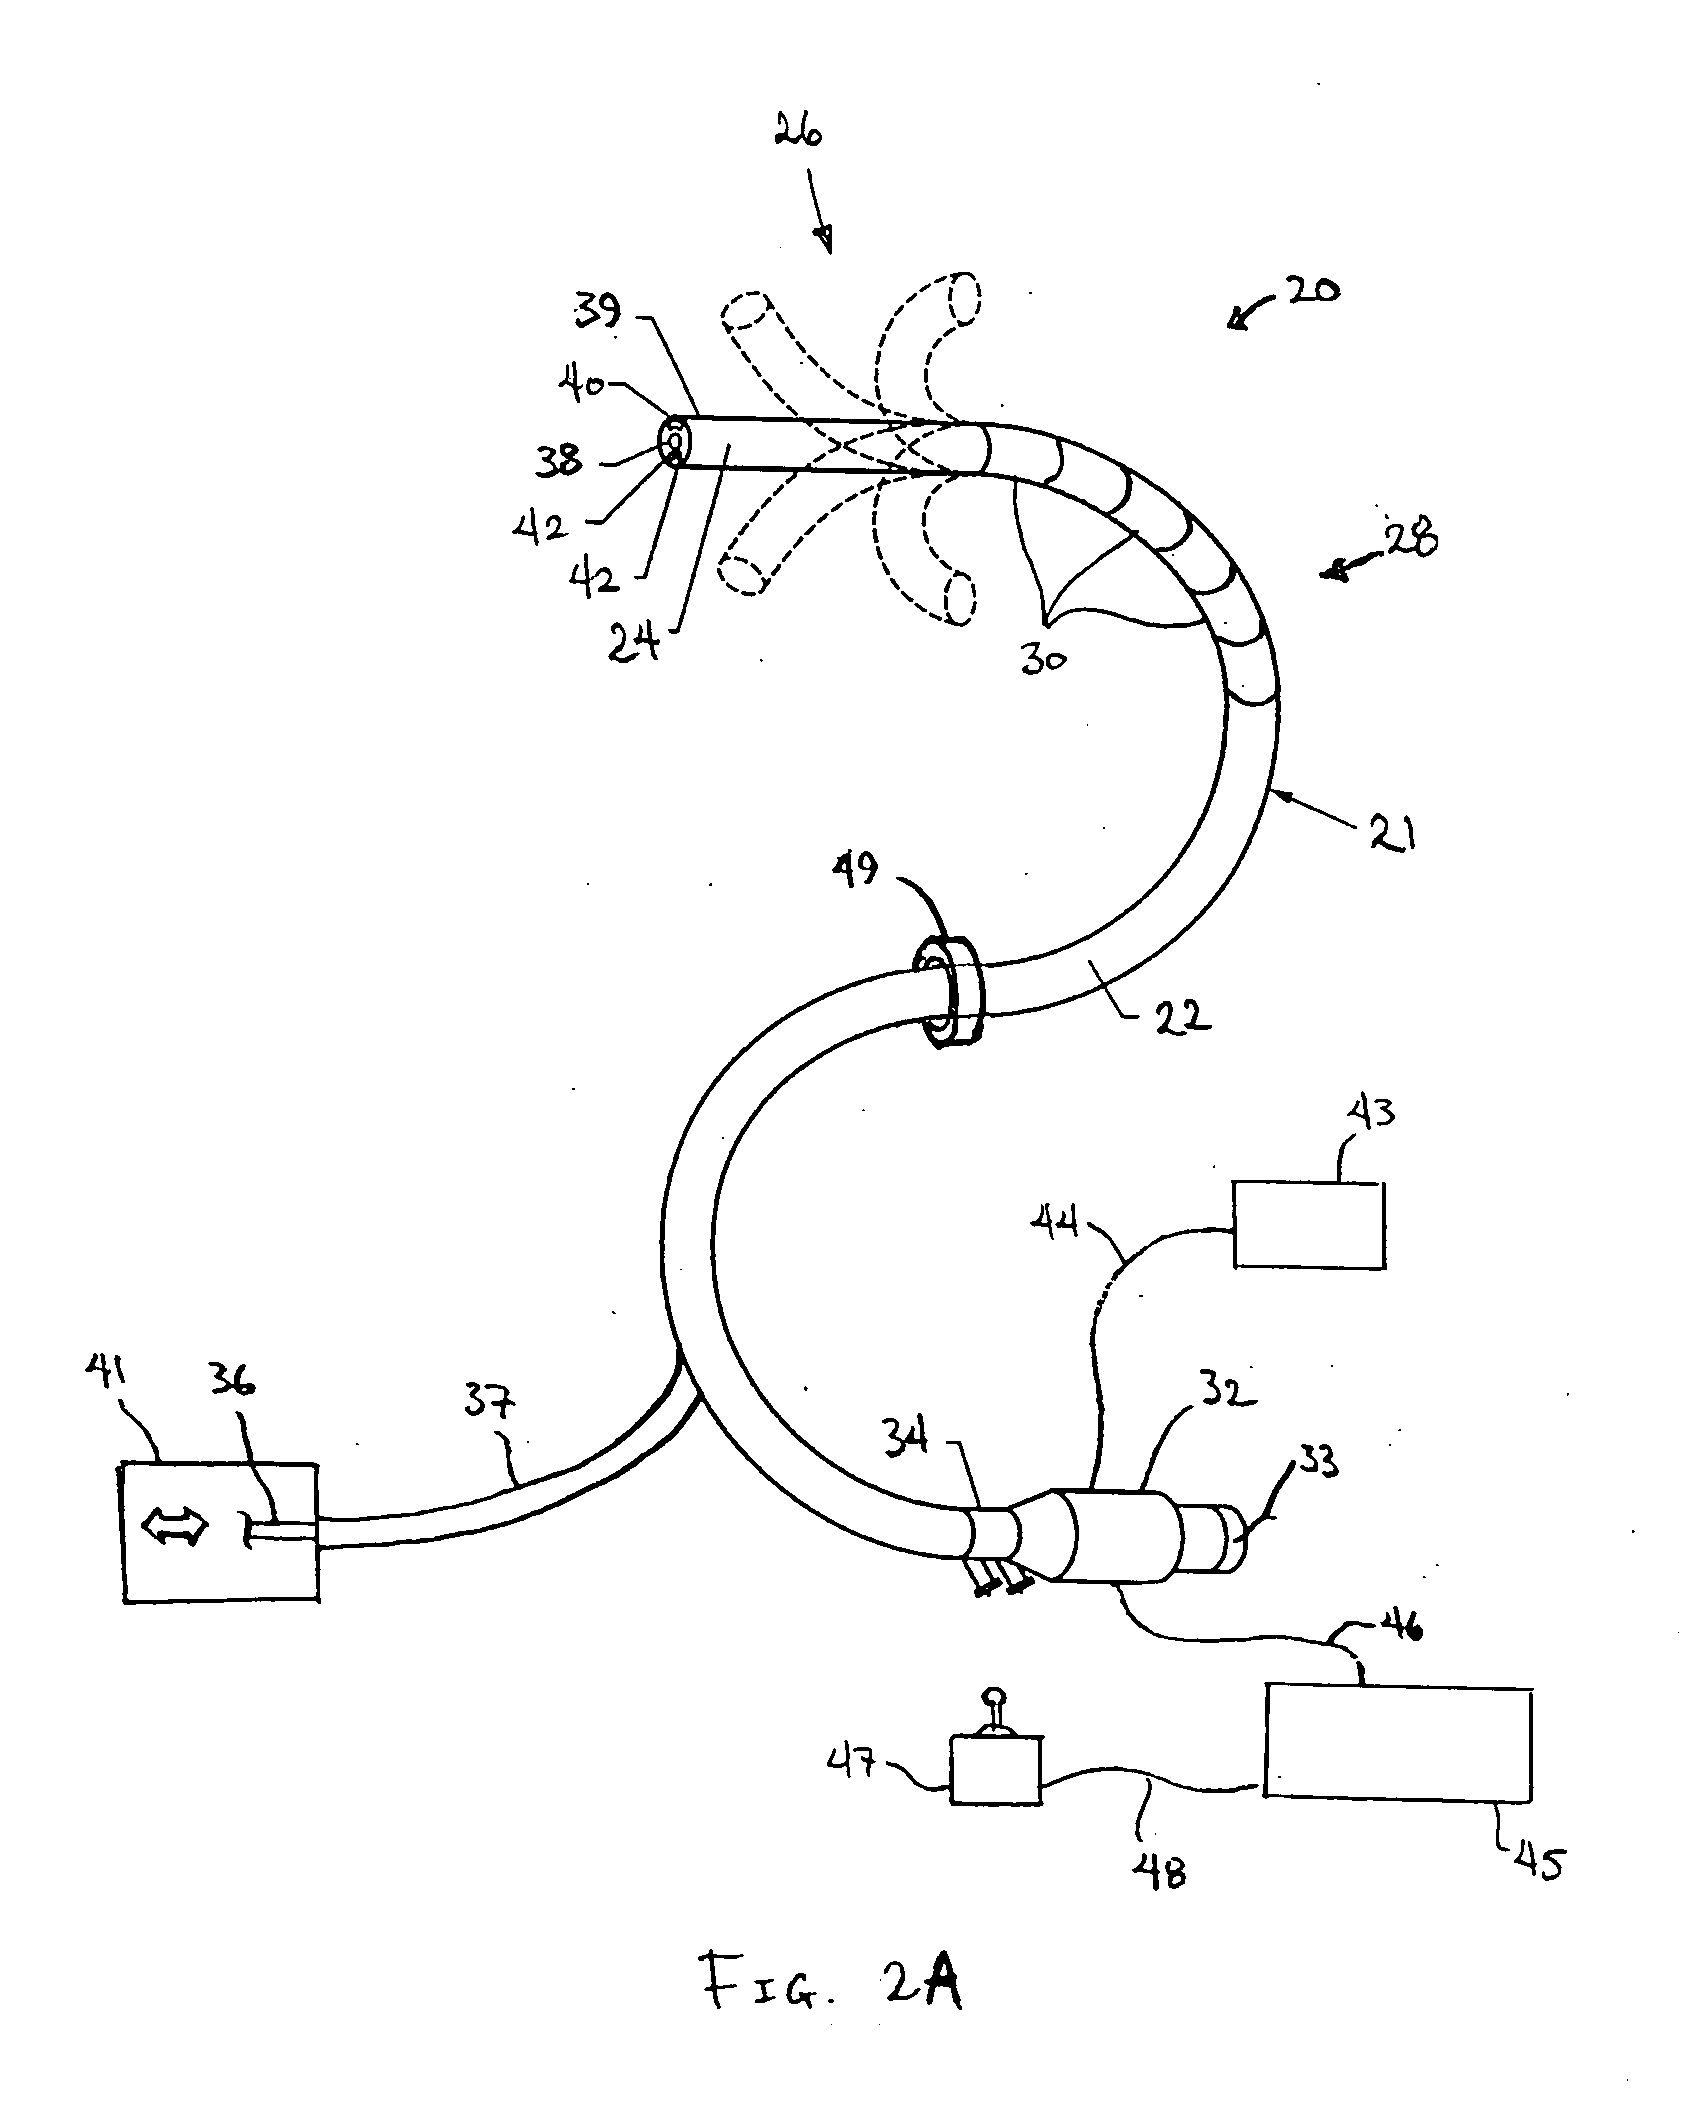 Method and apparatus having an elongate guide and controllable portion